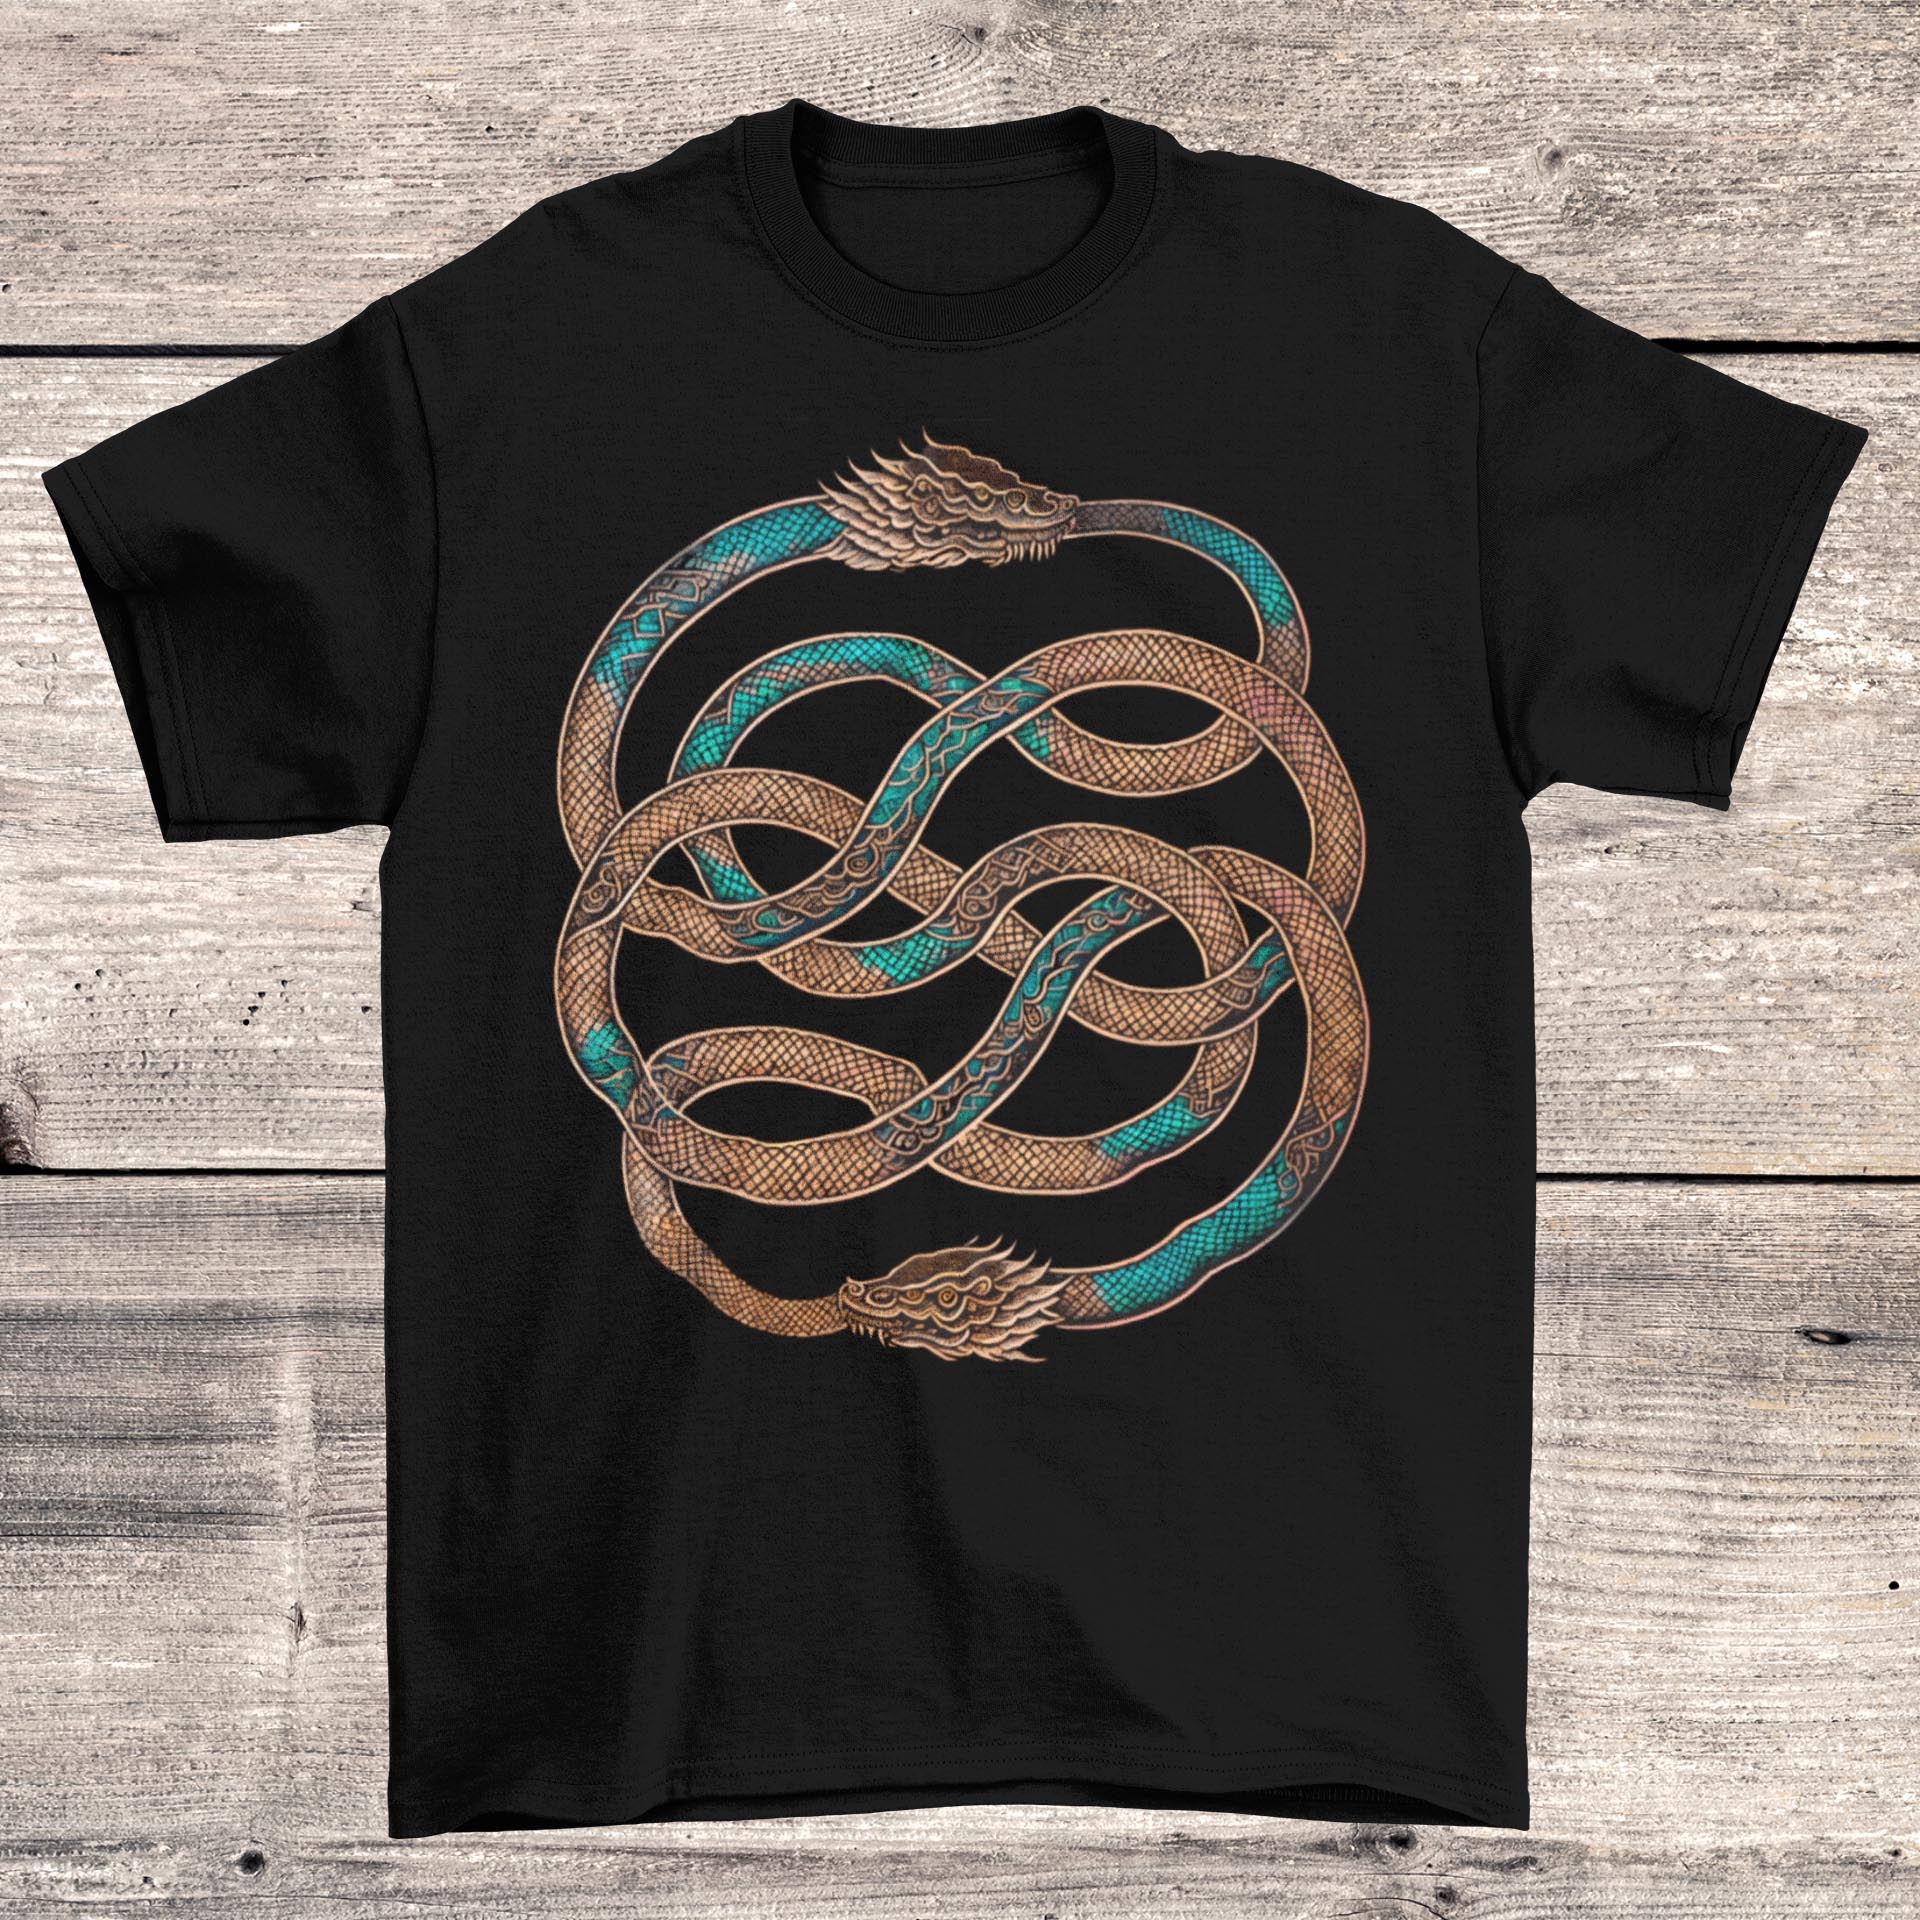 T-Shirts S / Black The Ouroboros: Medieval Mystical Serpent, Dragon | Esoteric Alchemy | Egyptian Circle of Life Graphic Art T-Shirt